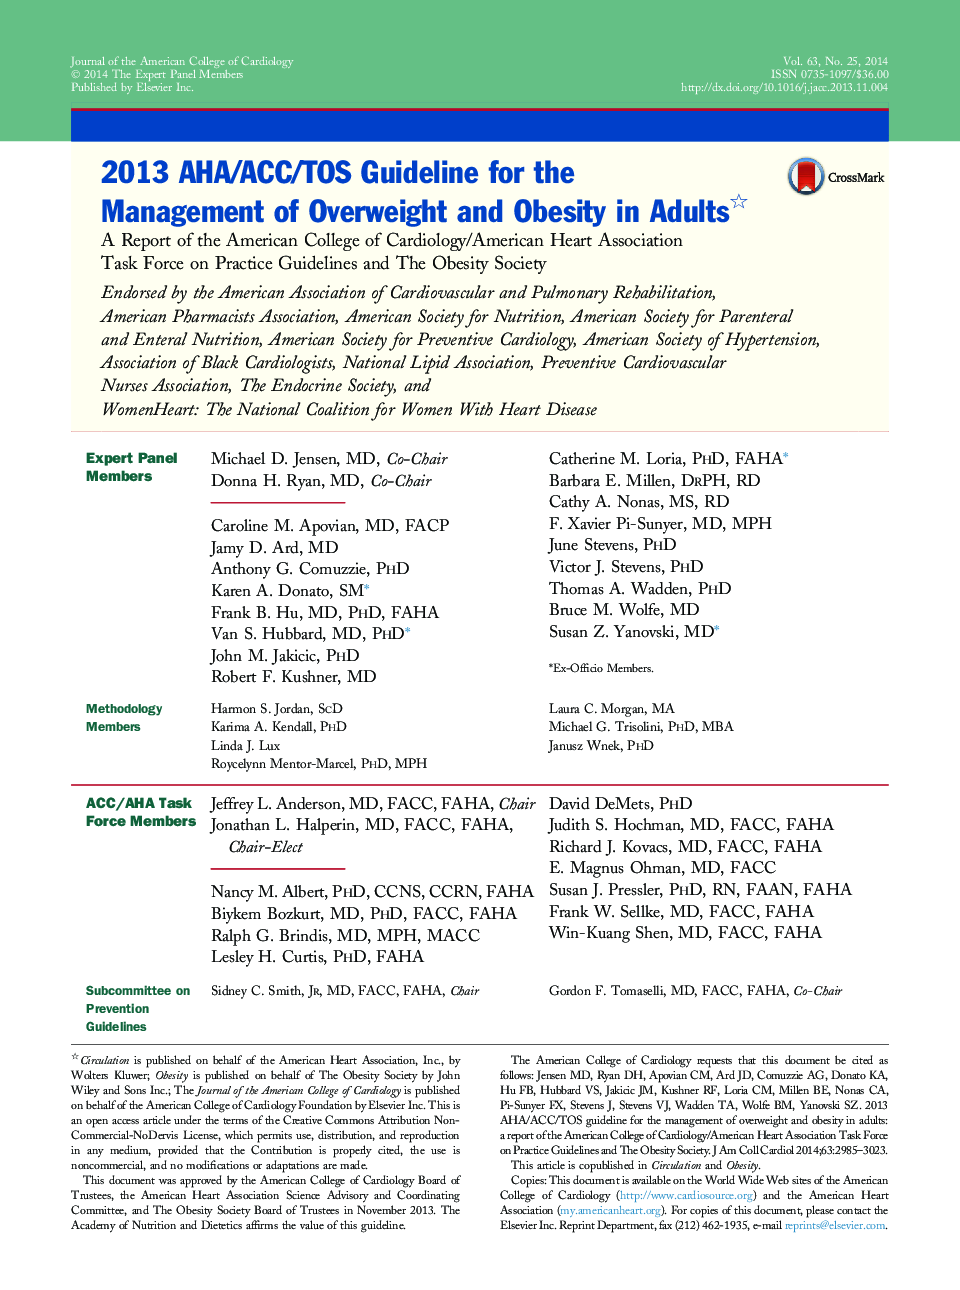 2013 AHA/ACC/TOS Guideline for the Management of Overweight and Obesity in Adults